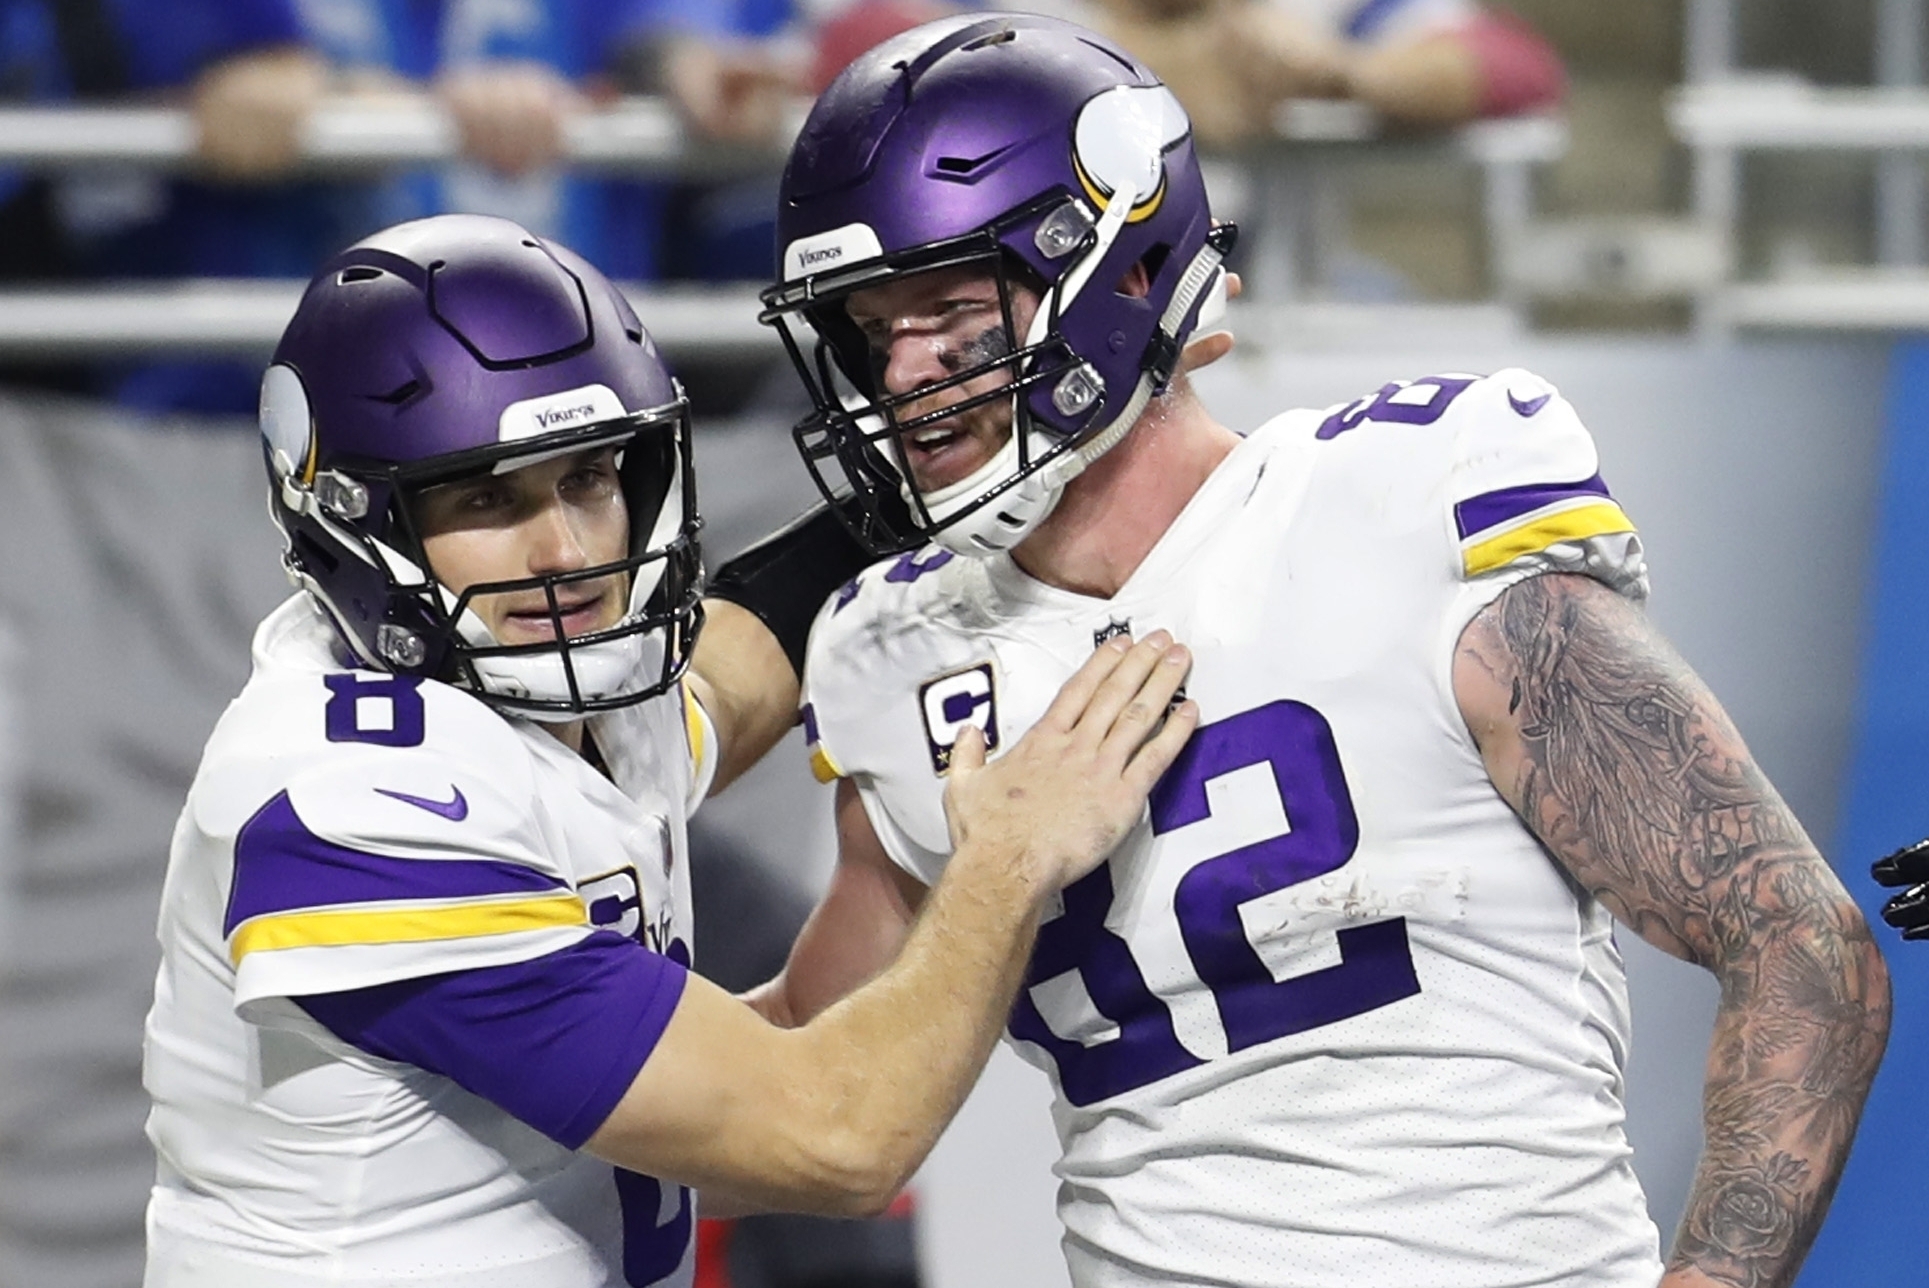 Vikings' Overtime Touchdown Upsets Saints' Plans Once Again - The